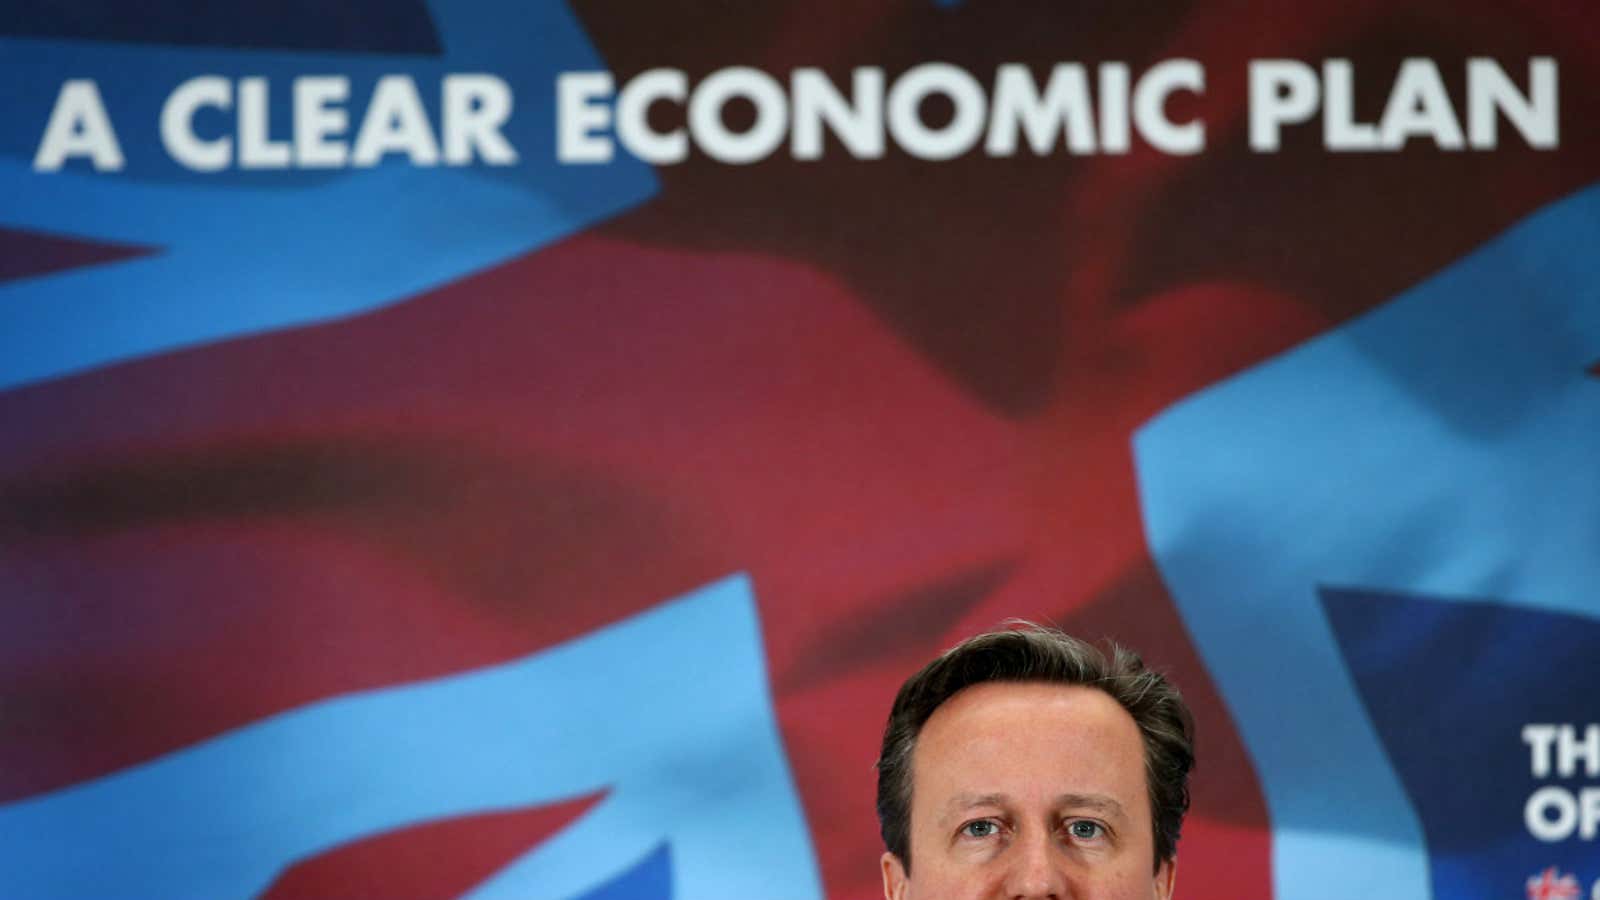 The economy threatens to tank prime minister David Cameron’s campaign.